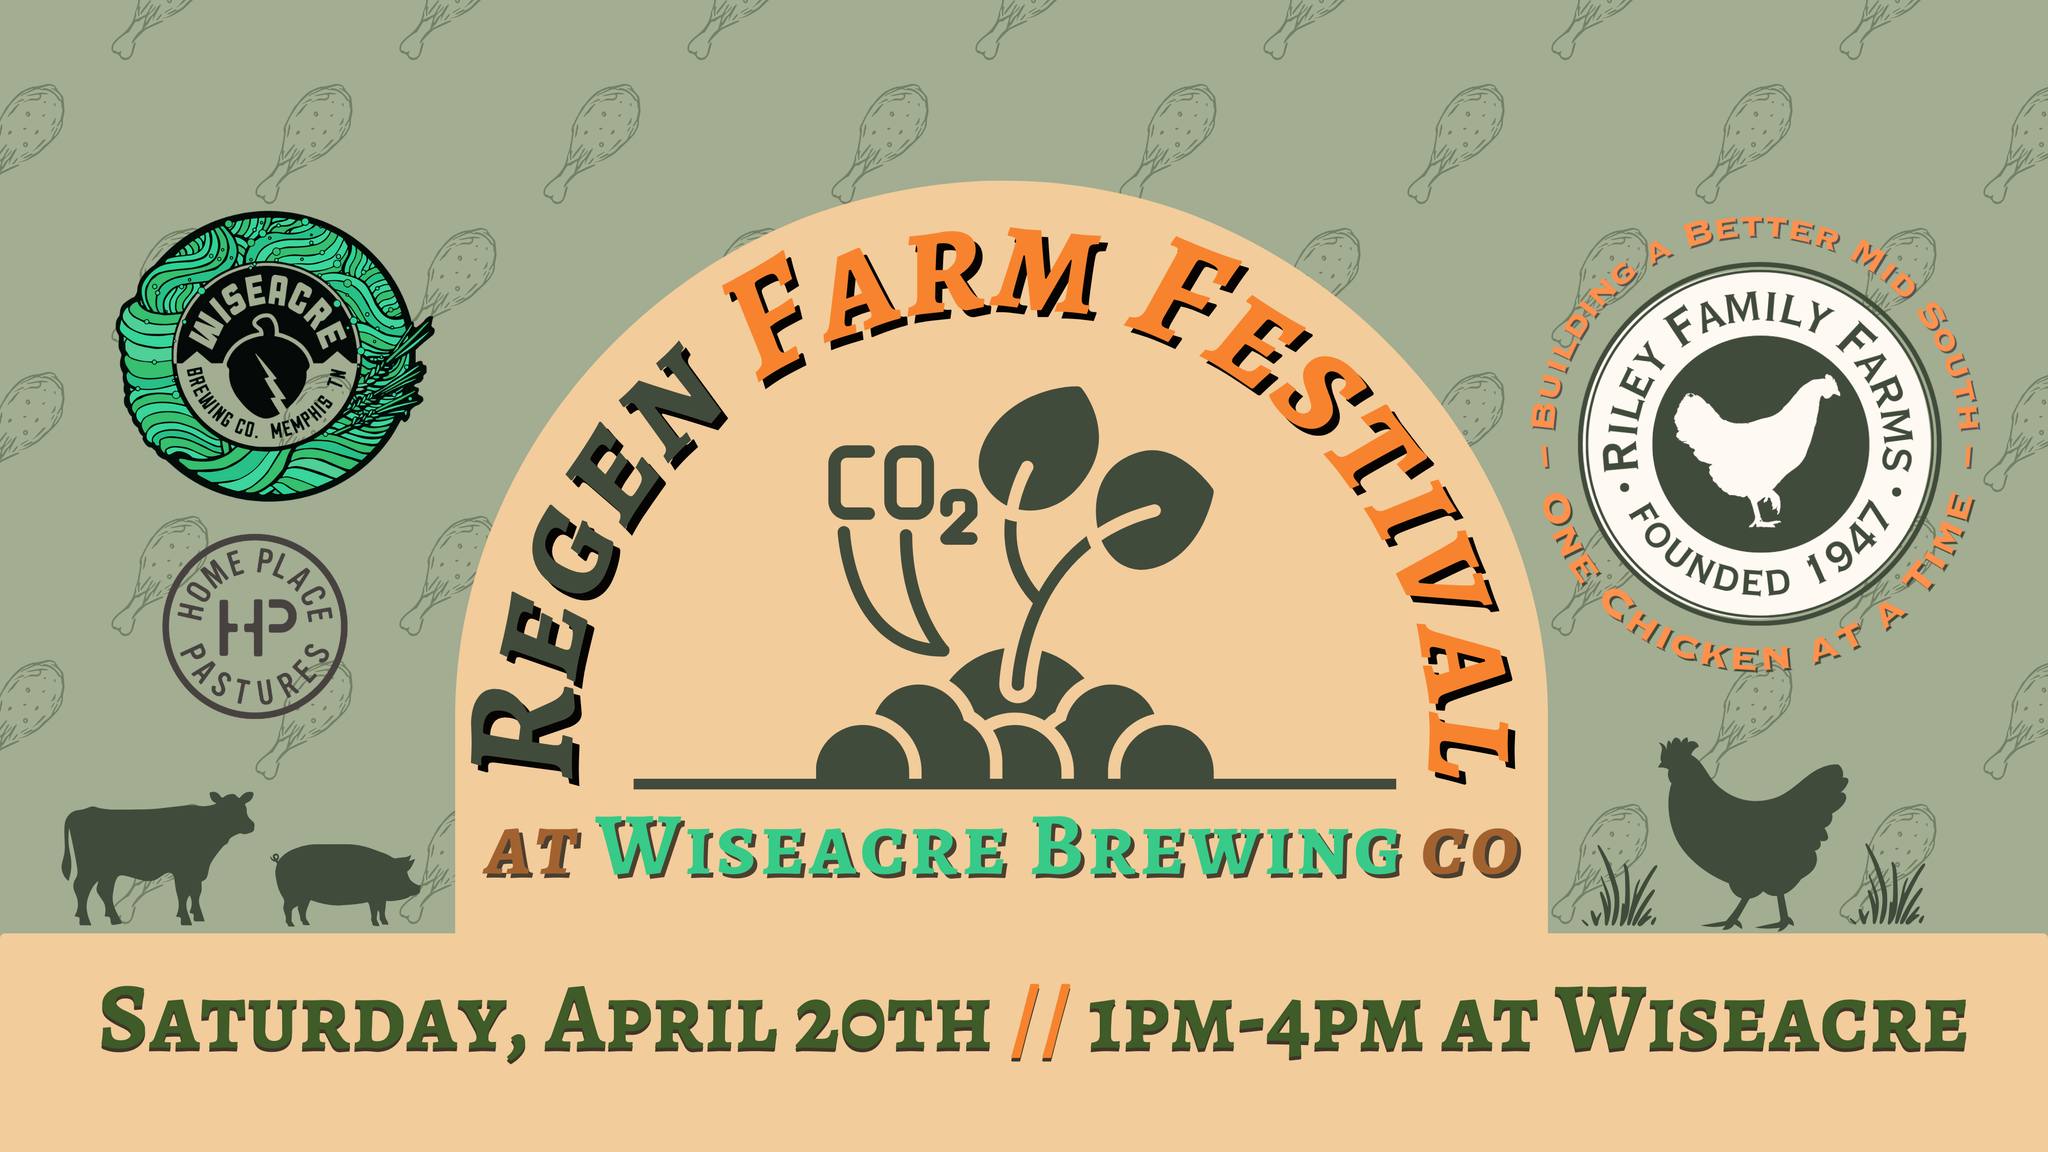 Promotional graphic for the Regen Farm Festival at Wiseacre Brewing Co on April 20th, featuring farm animal silhouettes, plant motifs, and sponsor logos.